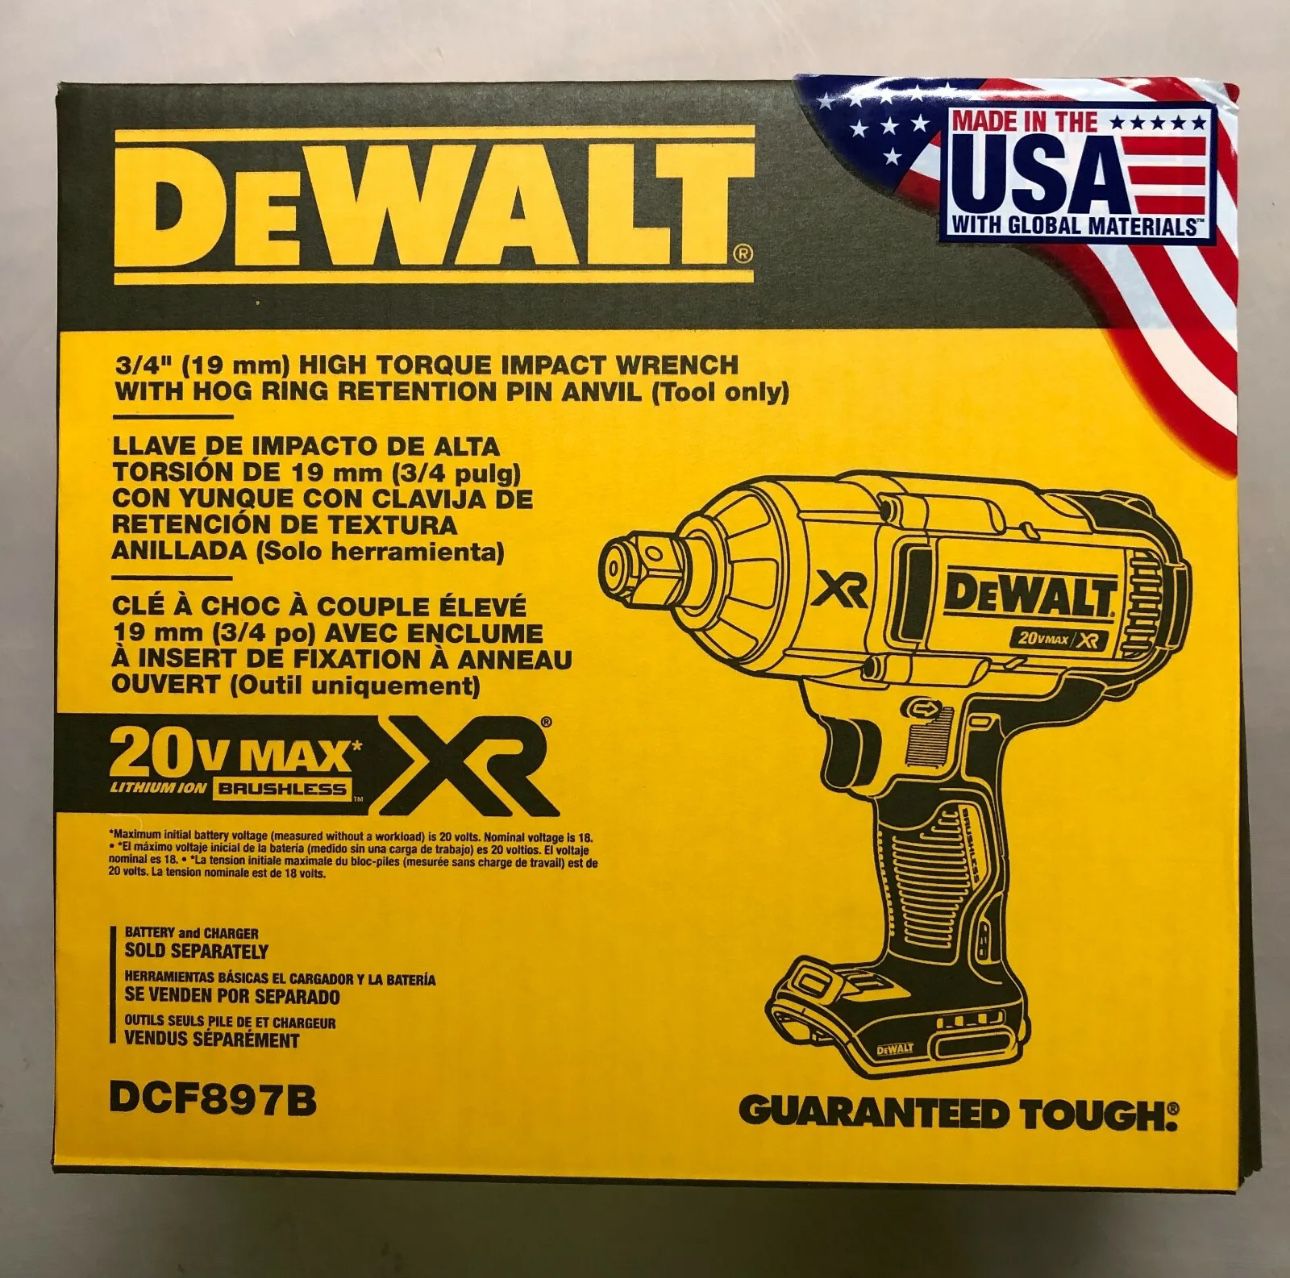 DEWALT 20V MAX XR Cordless Brushless 3/4 in. High Torque Impact Wrench w/ Hog Ring Anvil (Tool Only)